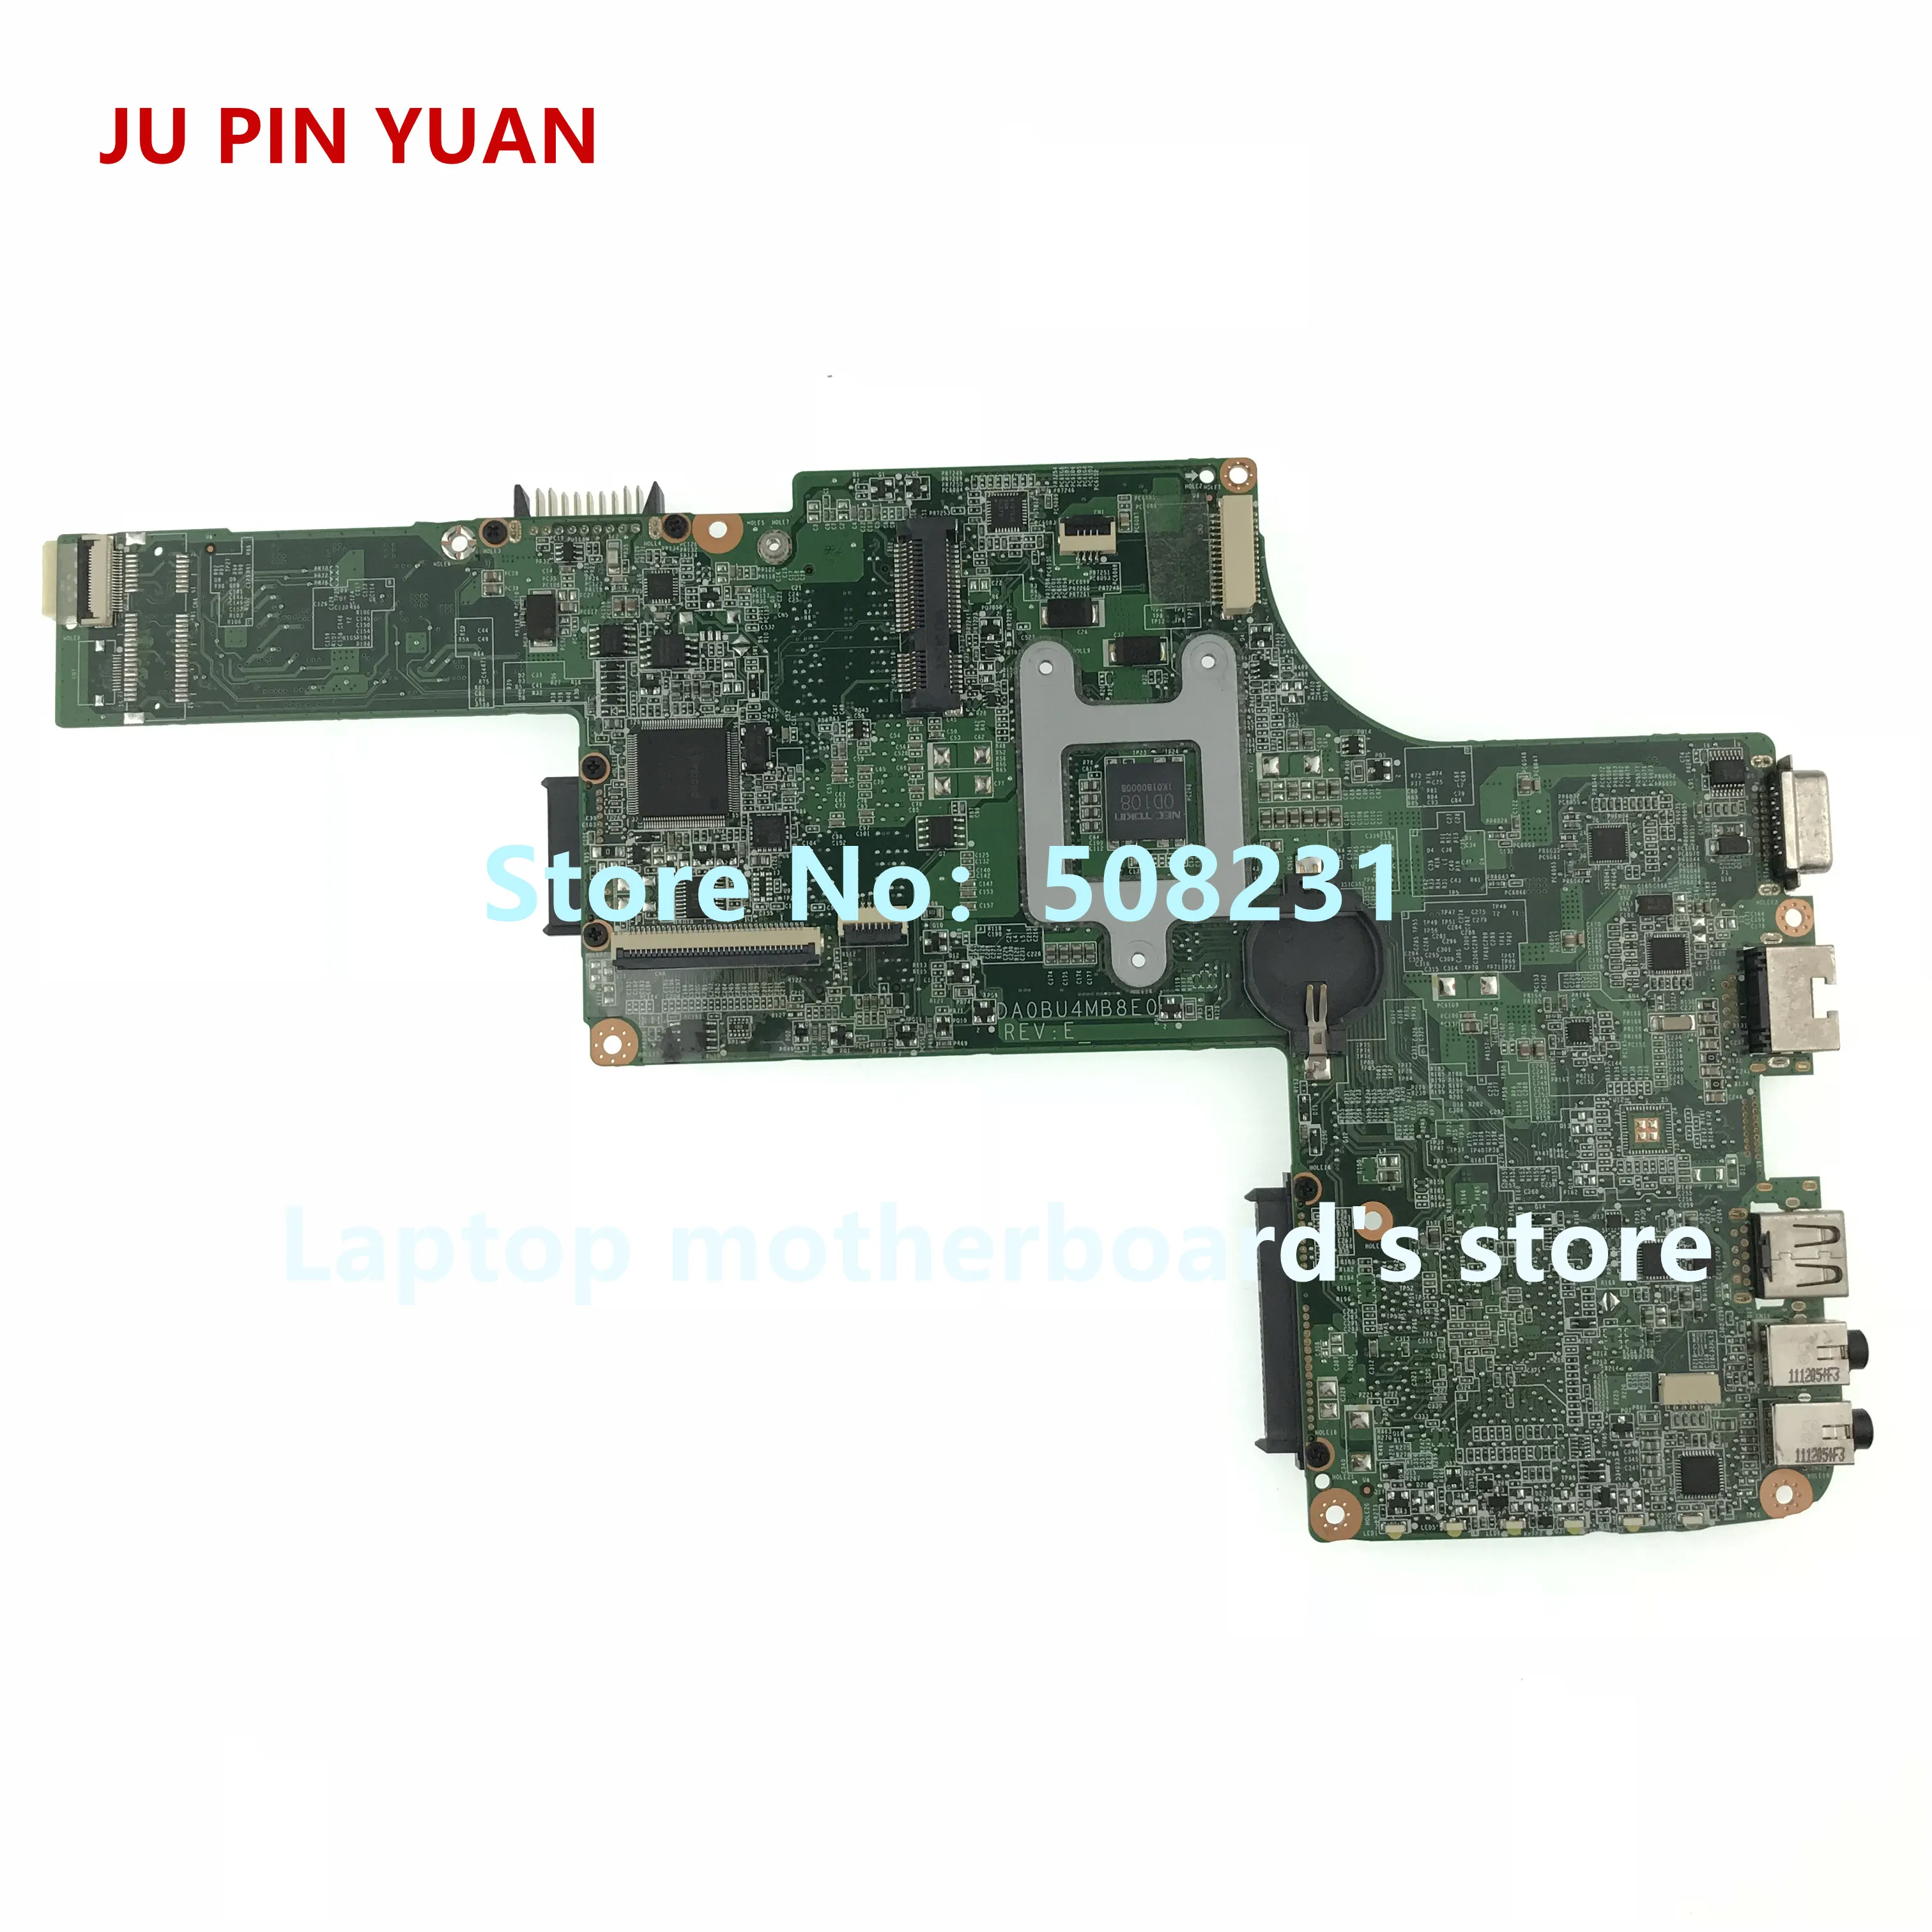 

JU PIN YUAN DA0BU4MB8E0 A000095850 mainboard for Toshiba satellite L730 L735 Laptop motherboard HM55 All functions fully Tested